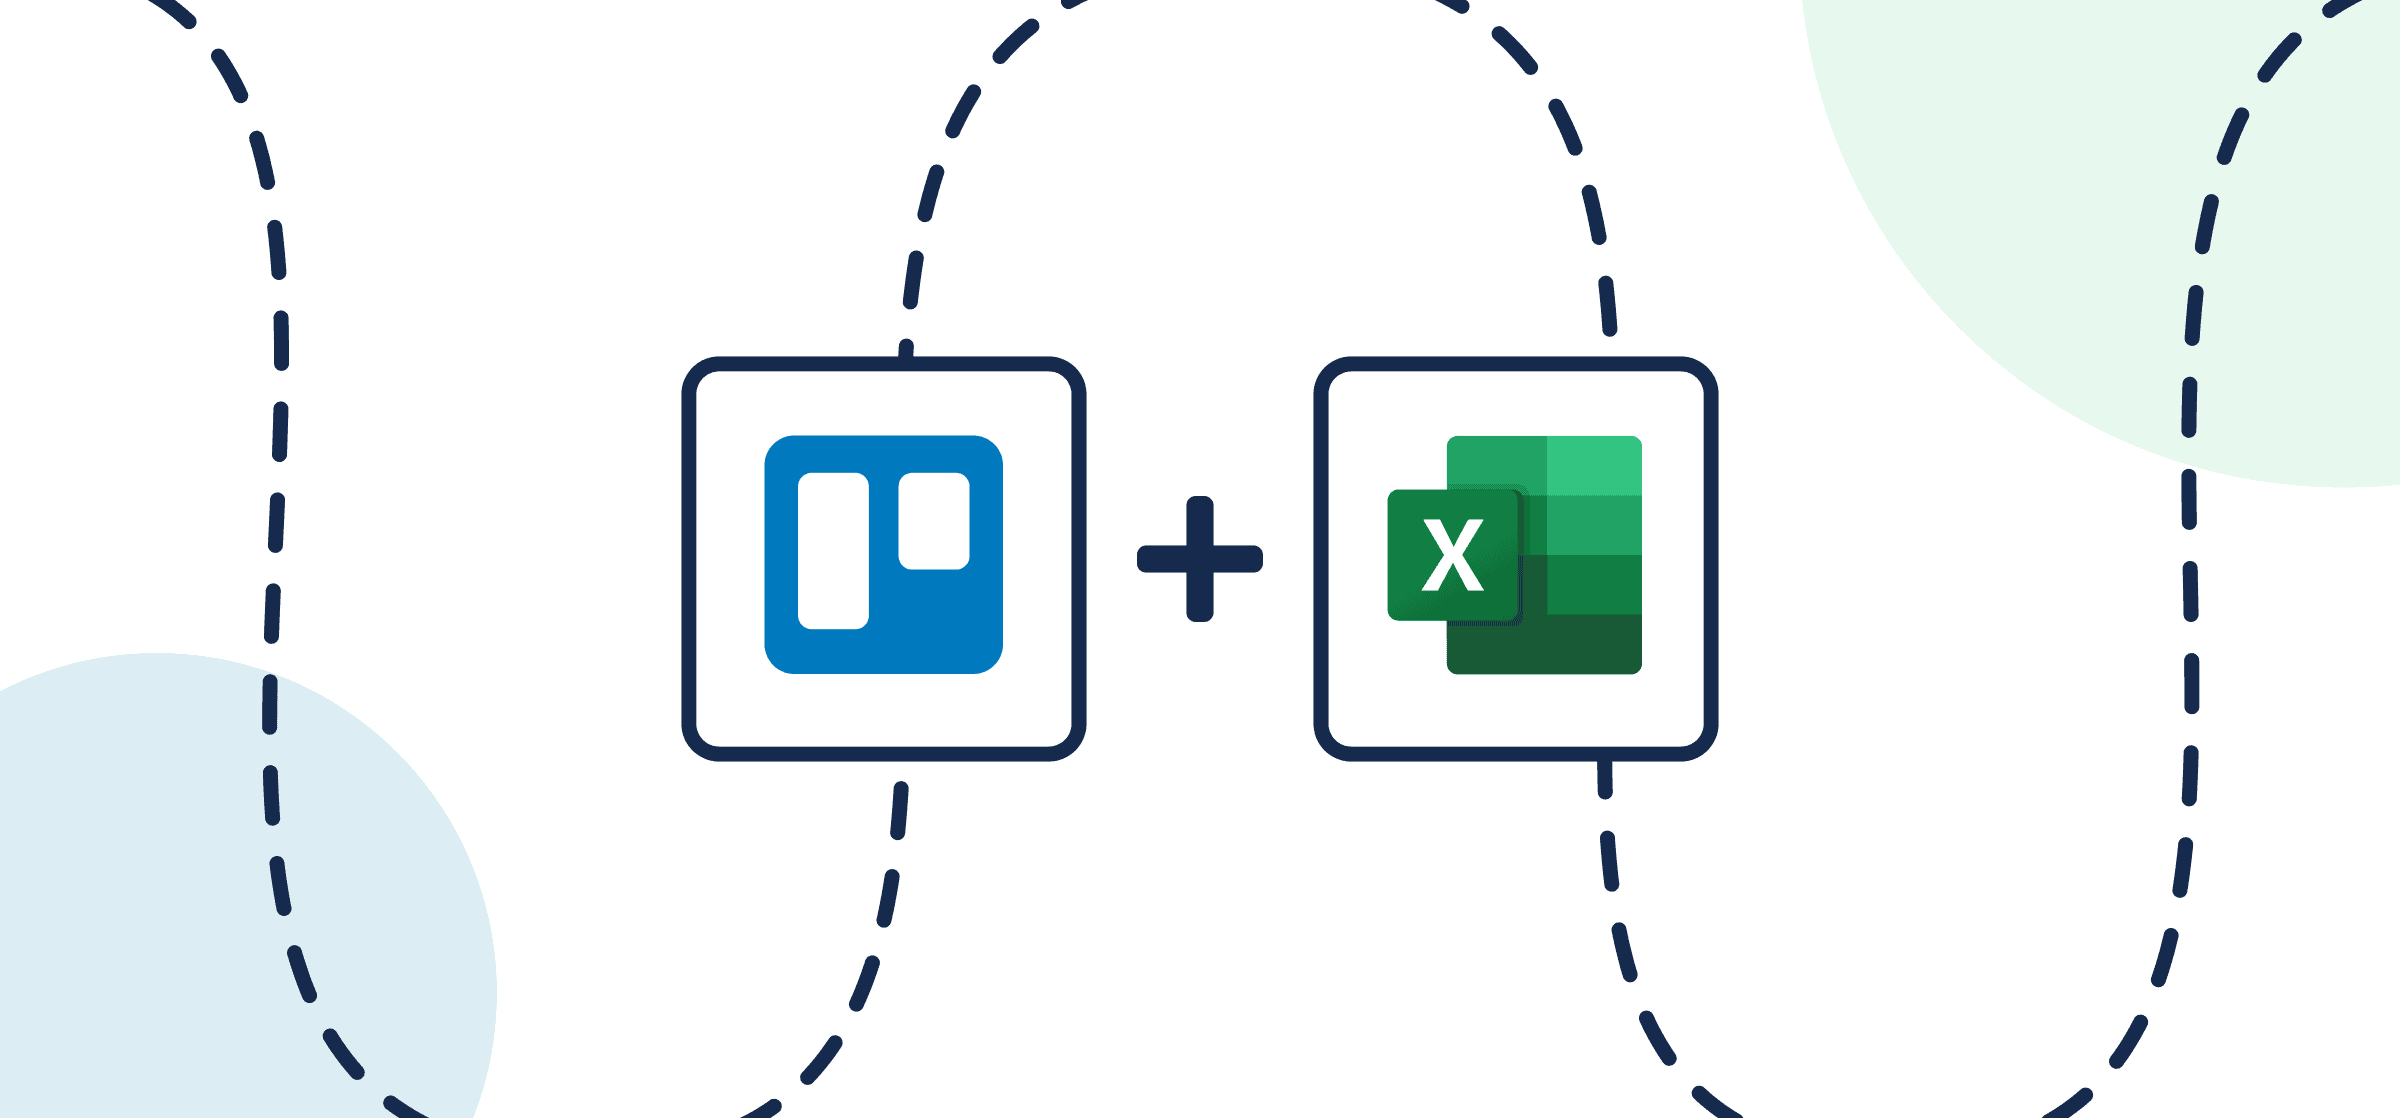 Featured image displaying the logos of Trello and Microsoft Excel in Unito's guide to setting up a simple Two-Way Sync.